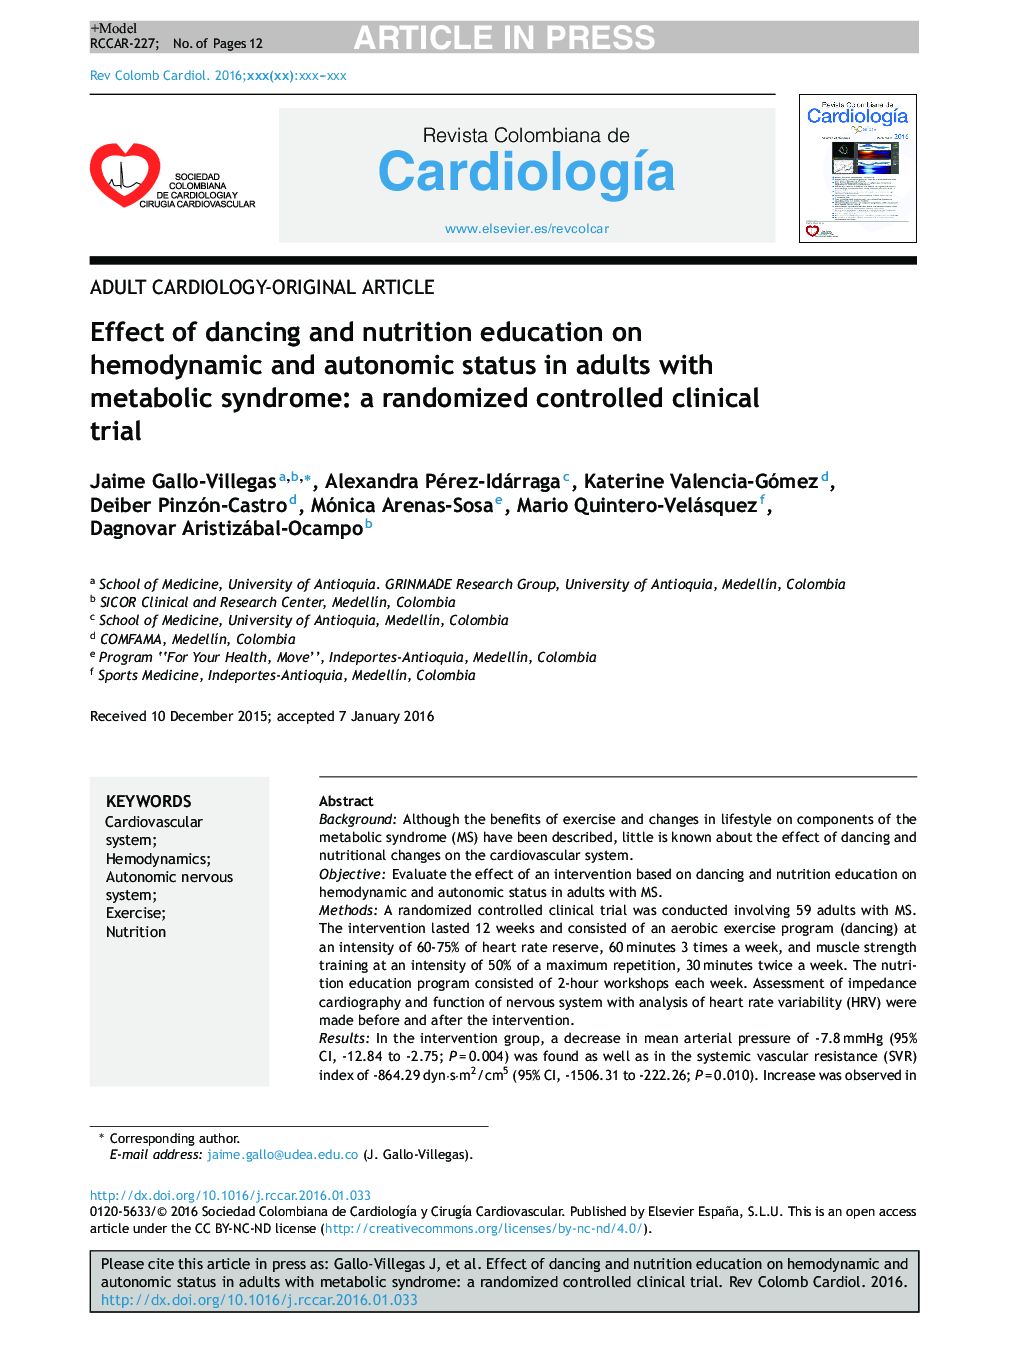 Effect of dancing and nutrition education on hemodynamic and autonomic status in adults with metabolic syndrome: a randomized controlled clinical trial